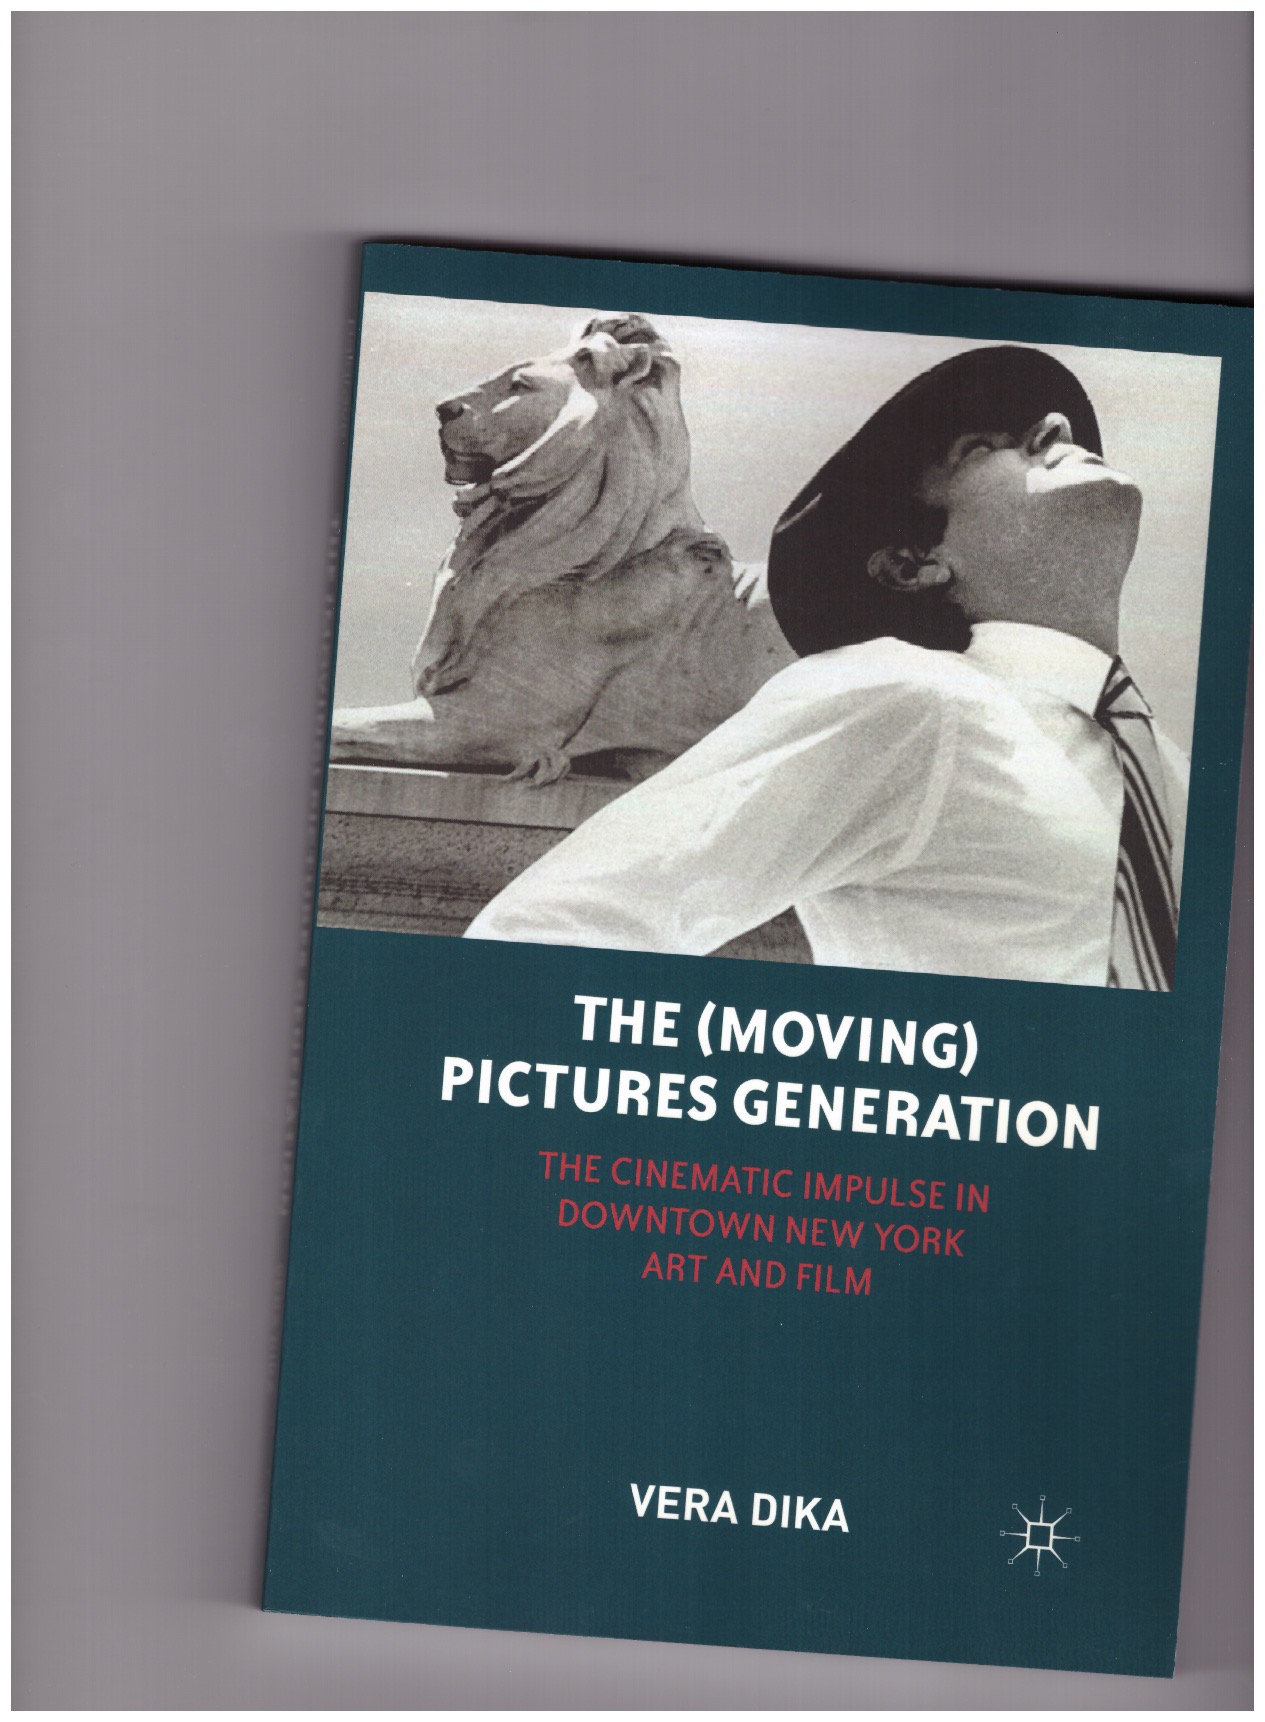 DIKA, Vera - The (moving) pictures generation